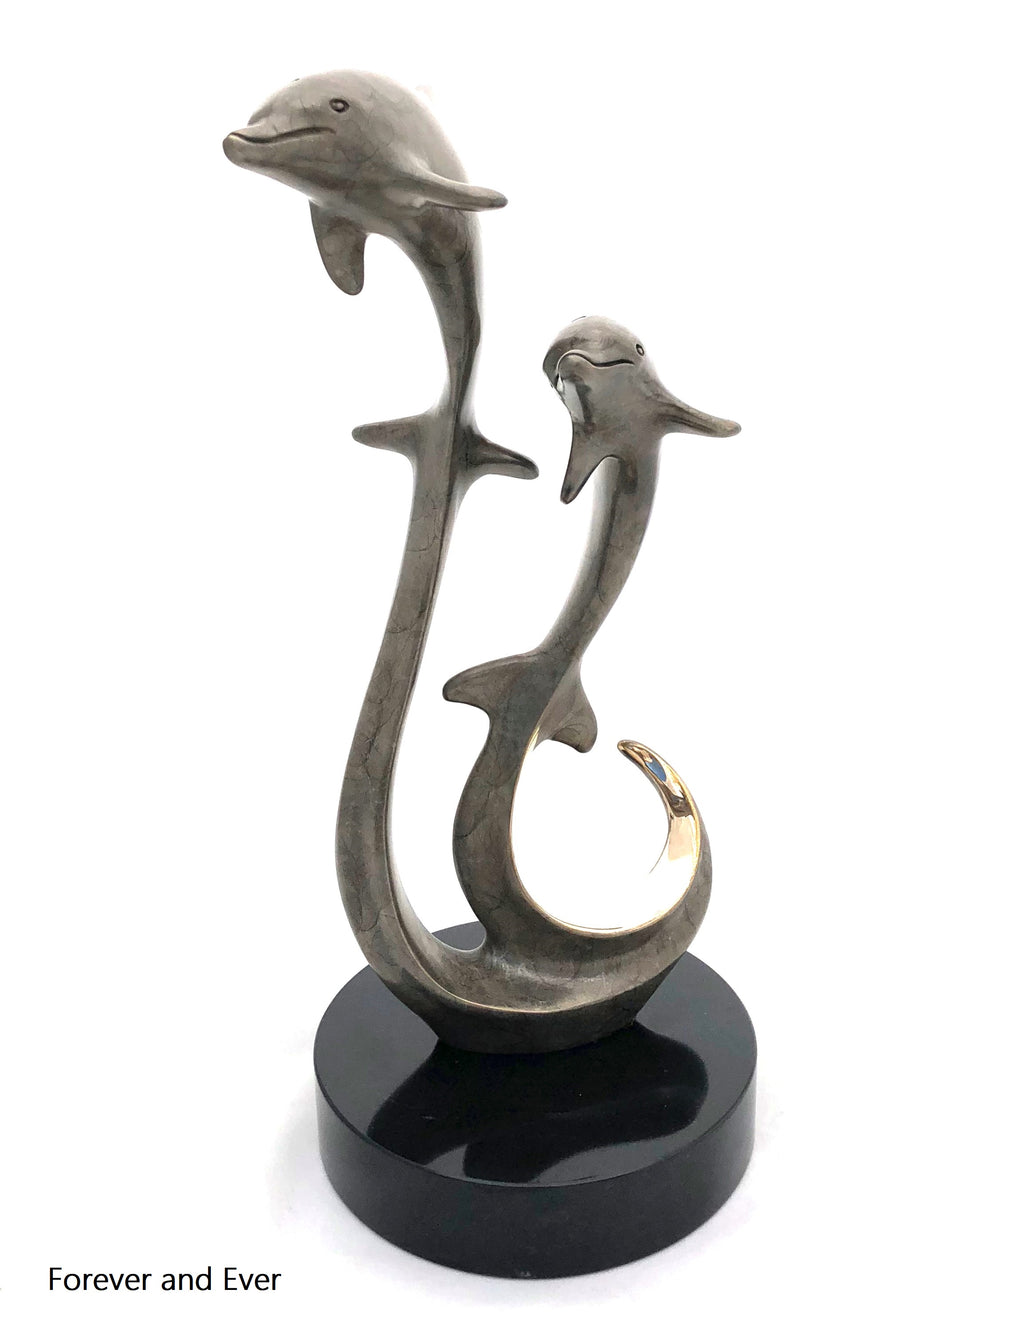 Bronze Dolphin Sculpture - Joyful Life Series "Forever and Ever" 12" tall